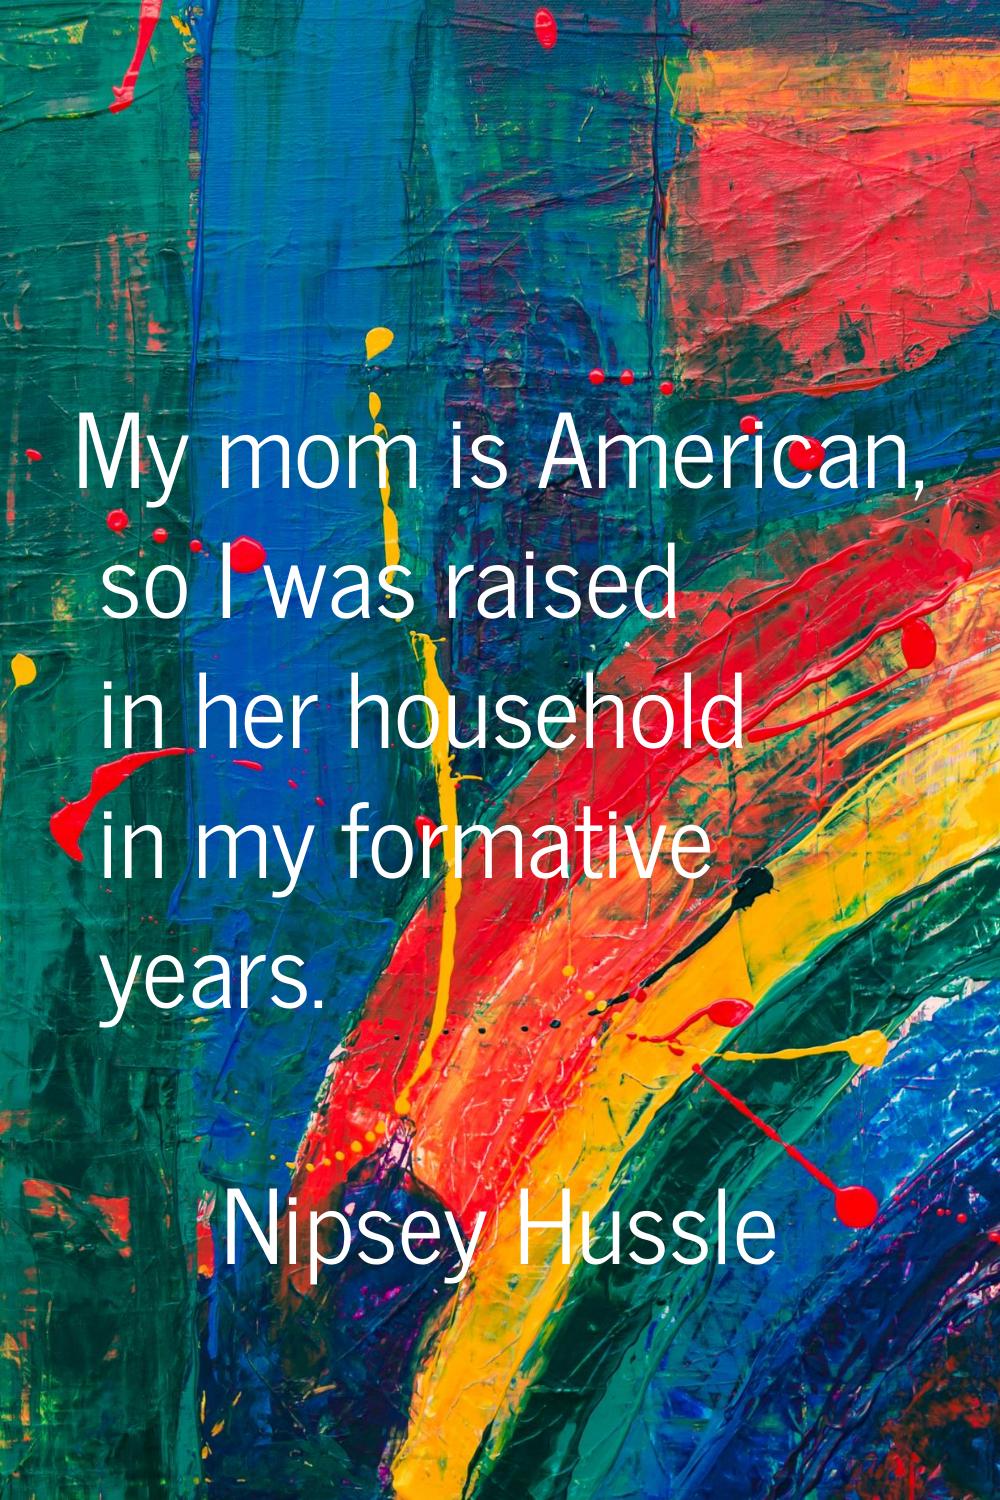 My mom is American, so I was raised in her household in my formative years.